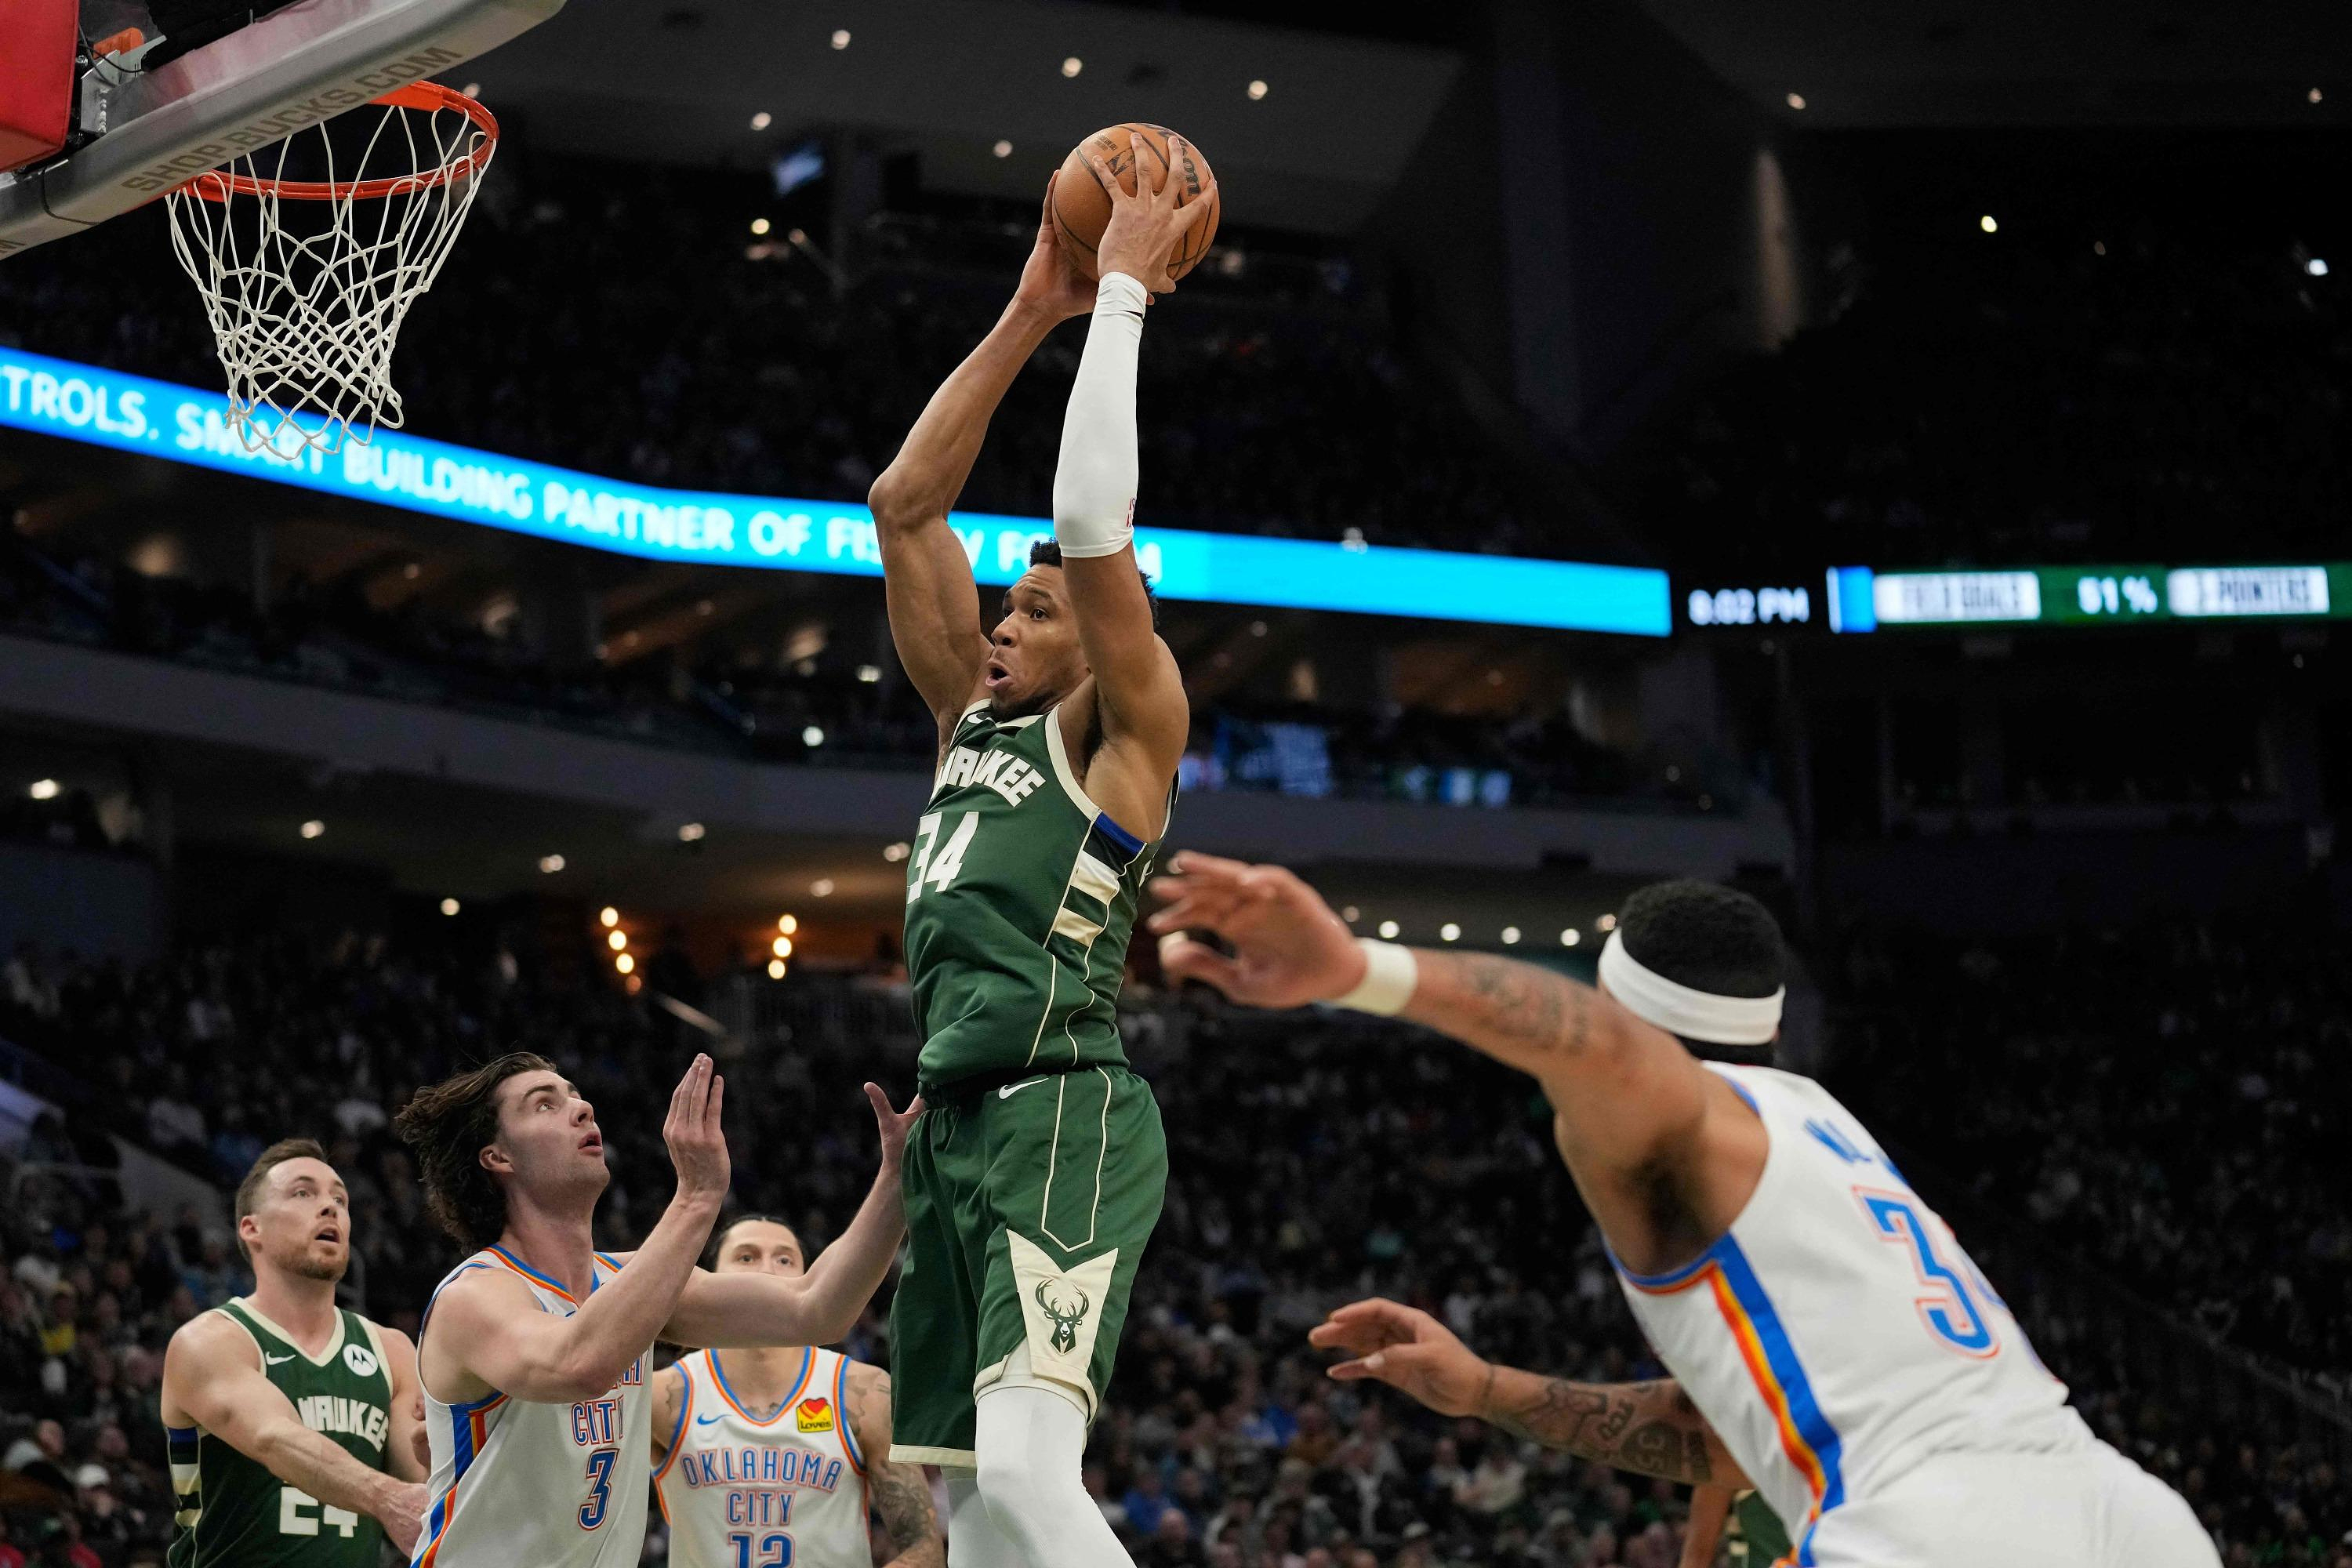 NBA: the Bucks plan for the clash against the Thunder, Gobert solid against Curry and the Warriors